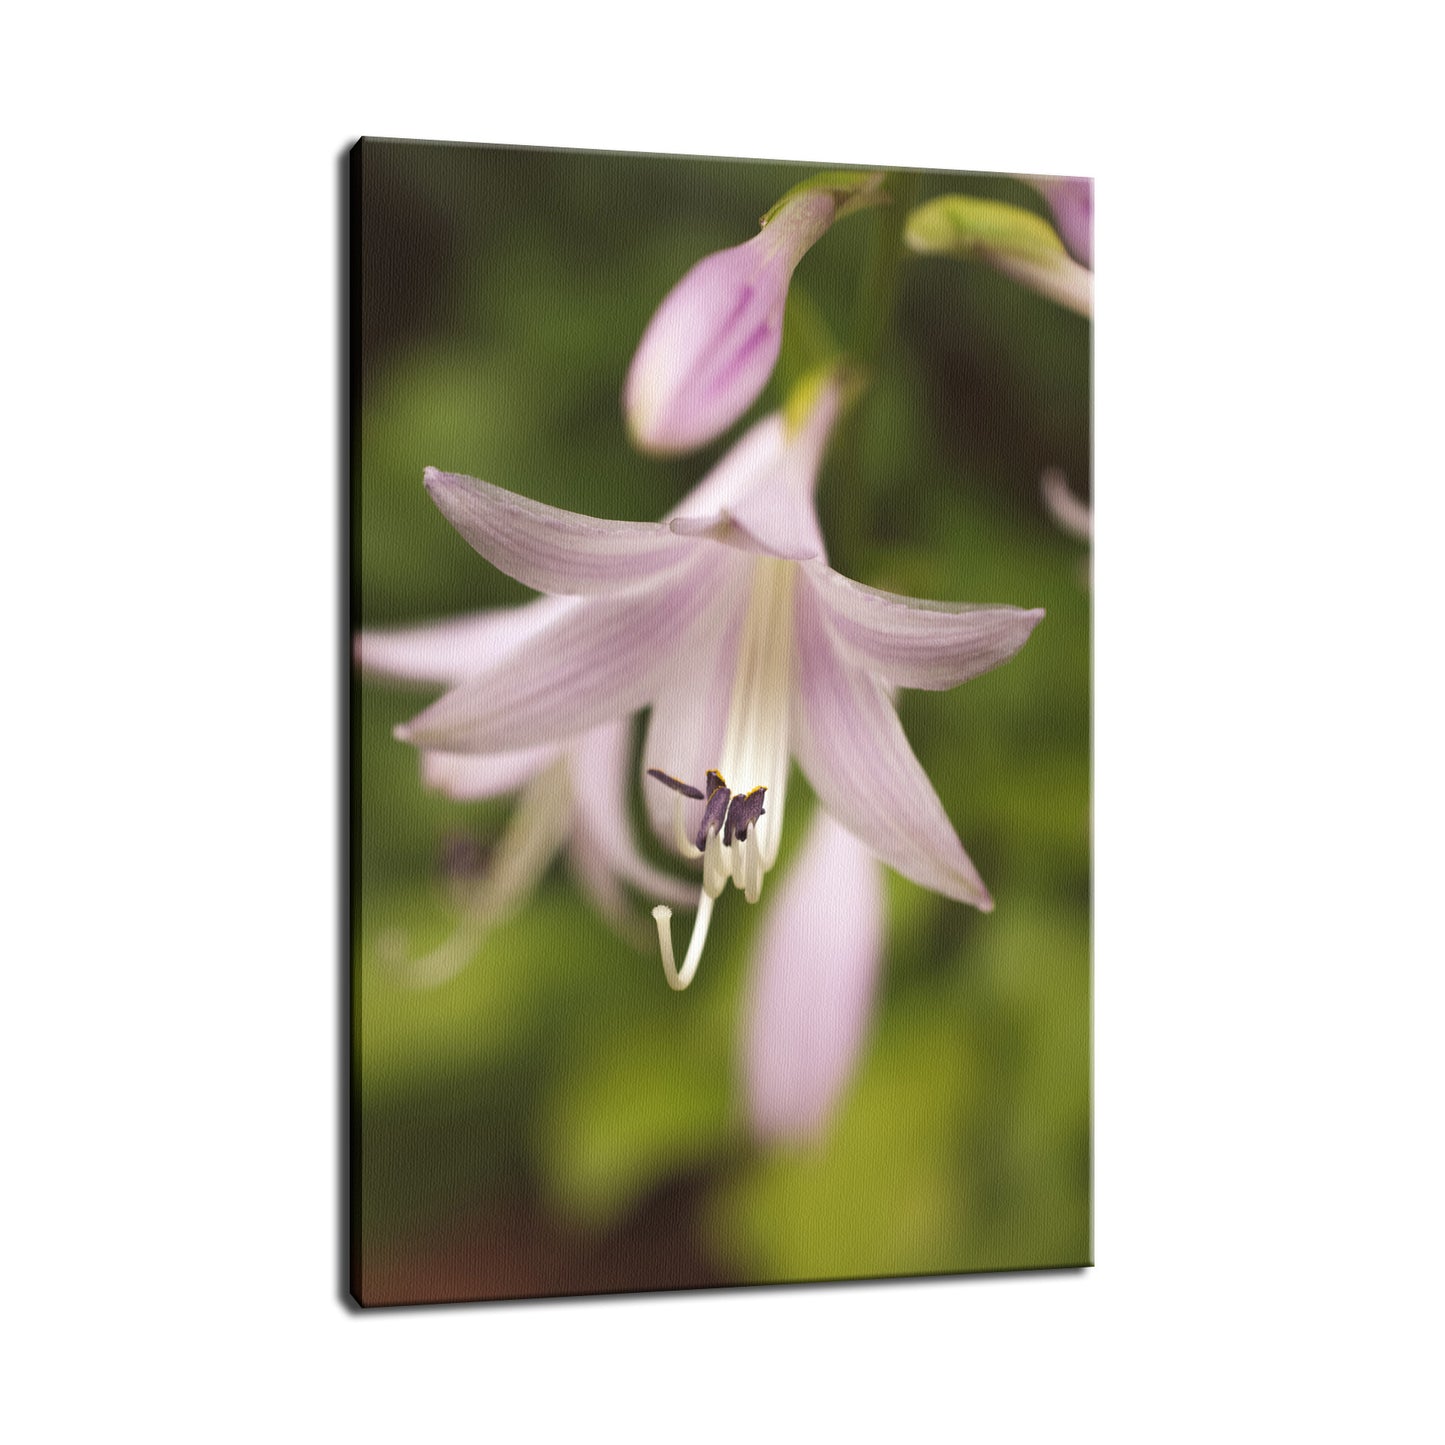 Softened Hosta Bloom Nature / Floral Photo Fine Art Canvas Wall Art Prints  - PIPAFINEART